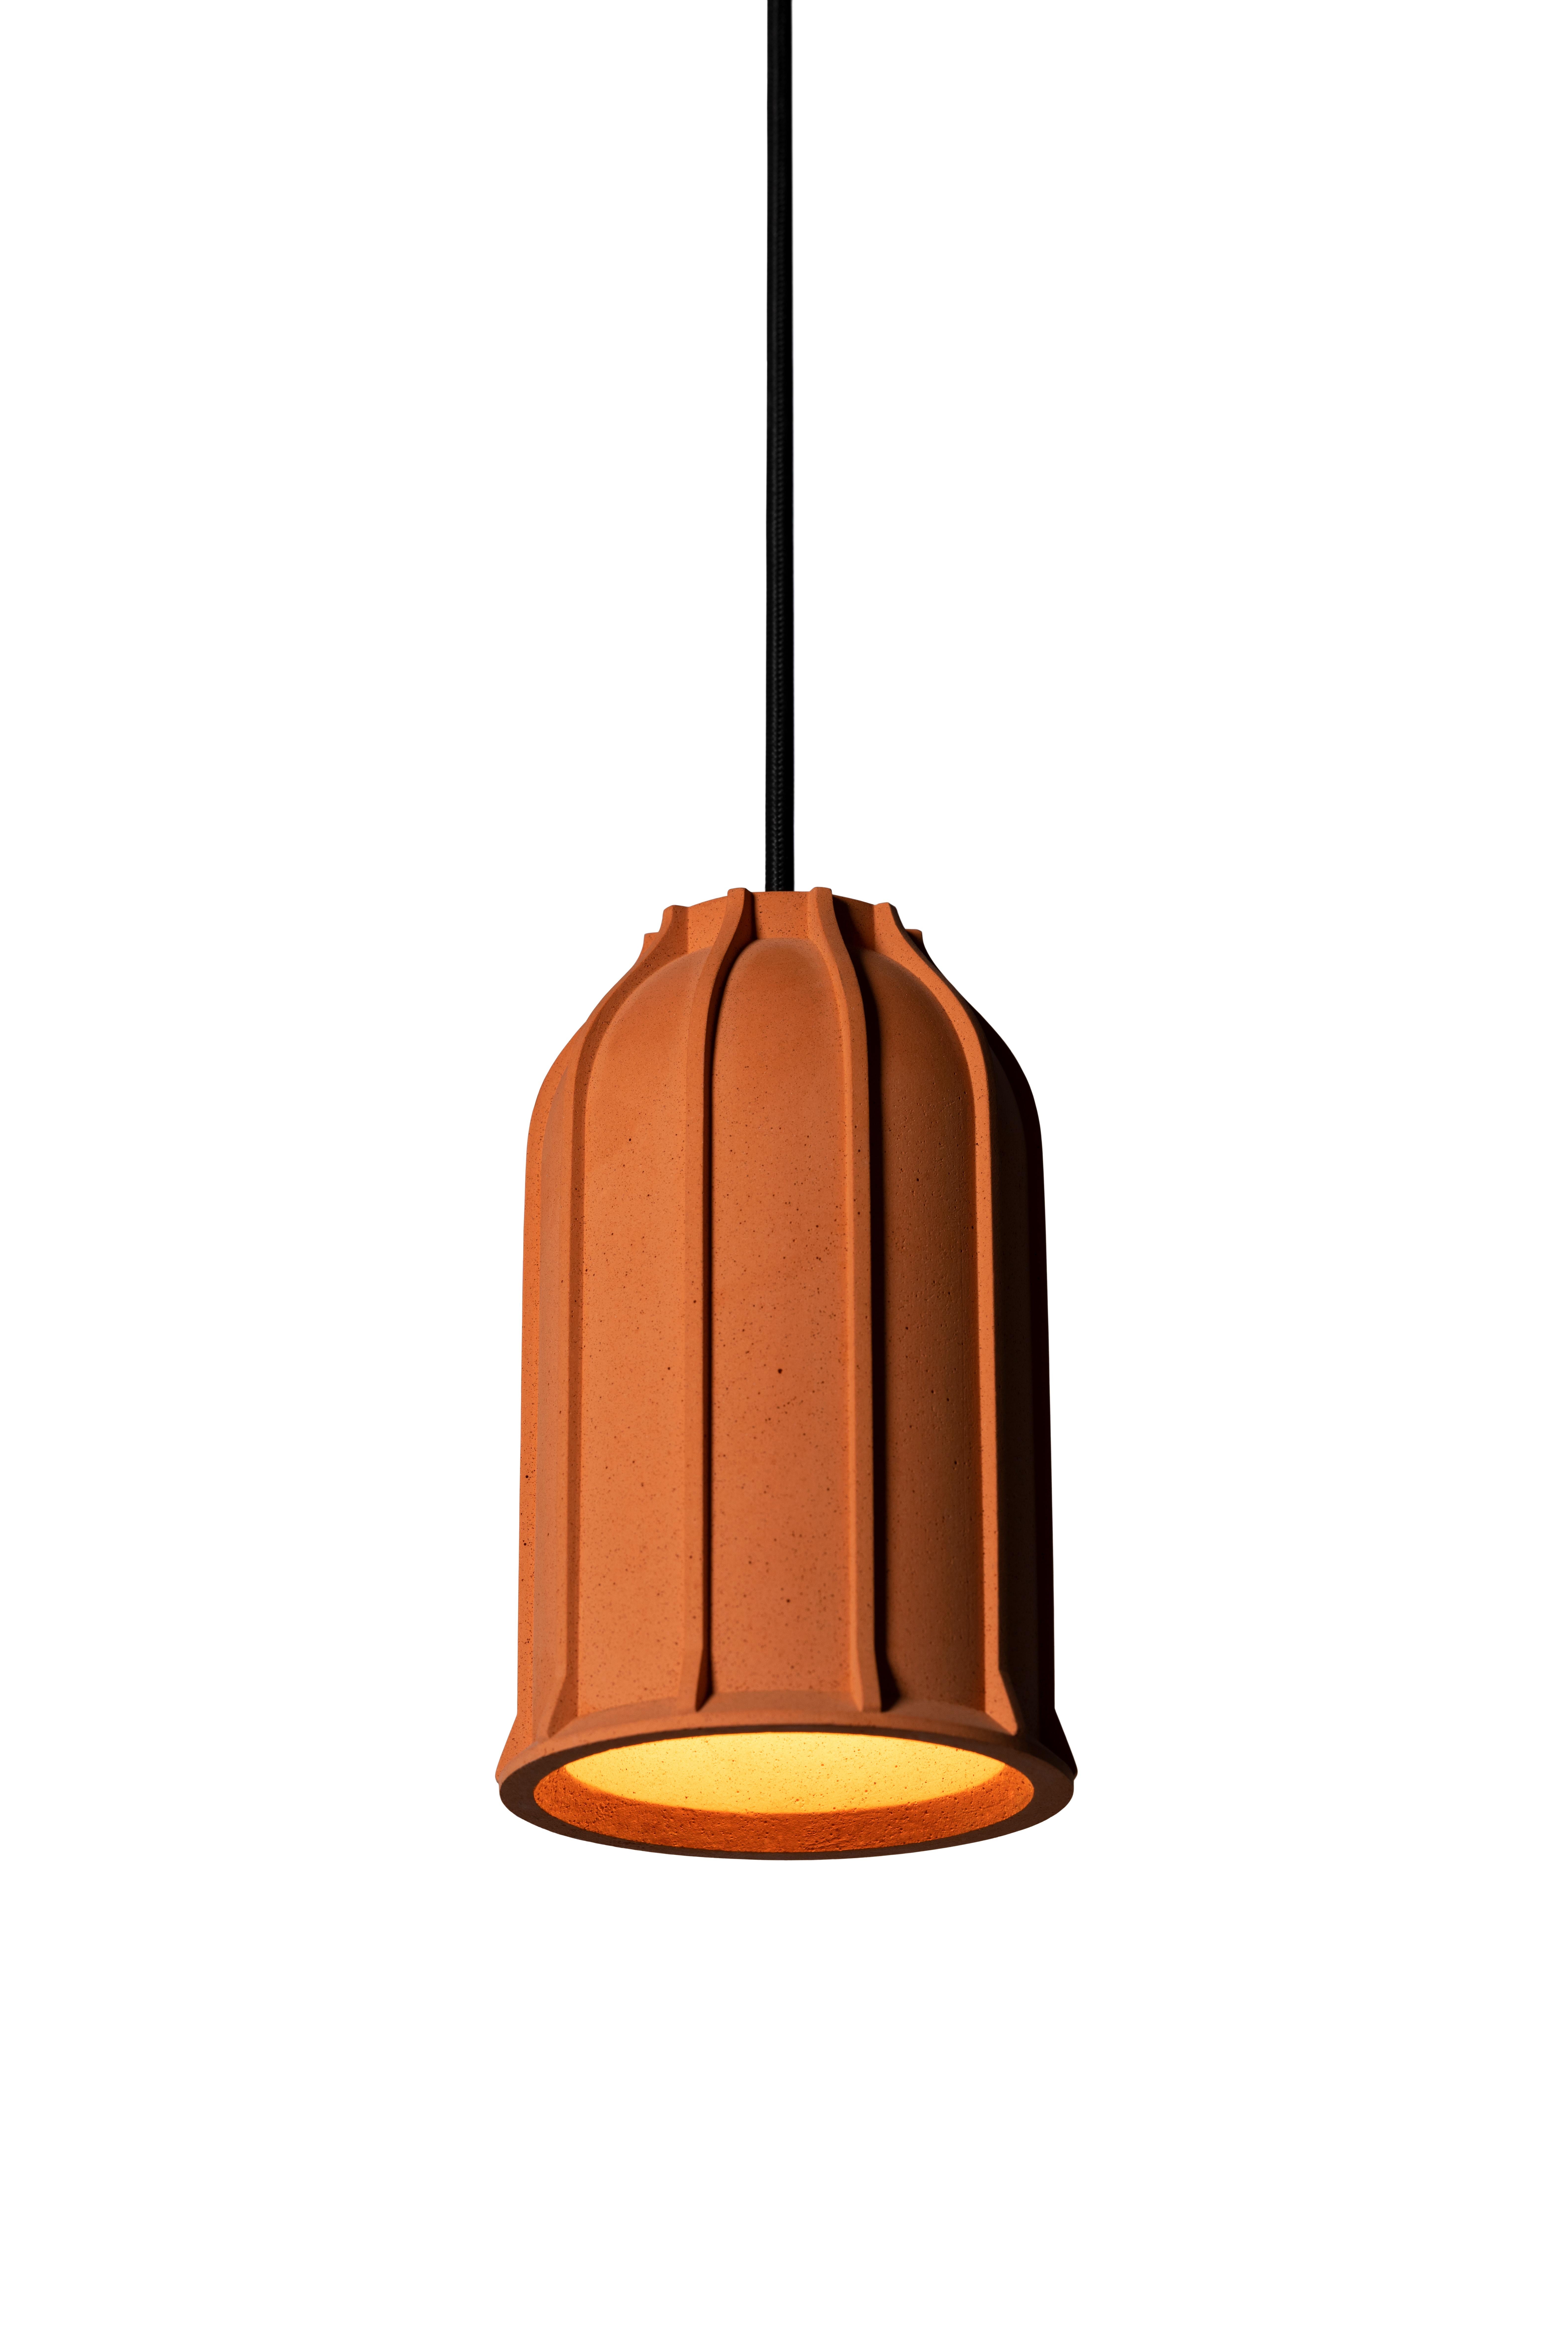 Pendant lamp 'U' by Nongzao x Bentu Design.
Material: Terracotta 
Color: Earthy orange 

Measures: 18.5 cm high, 11.5 cm diameter
Wire: 3 meters (black)
Lamp type: AC 100-240V 50-60Hz 9W - Comptable with US electric system.

Variations:
-